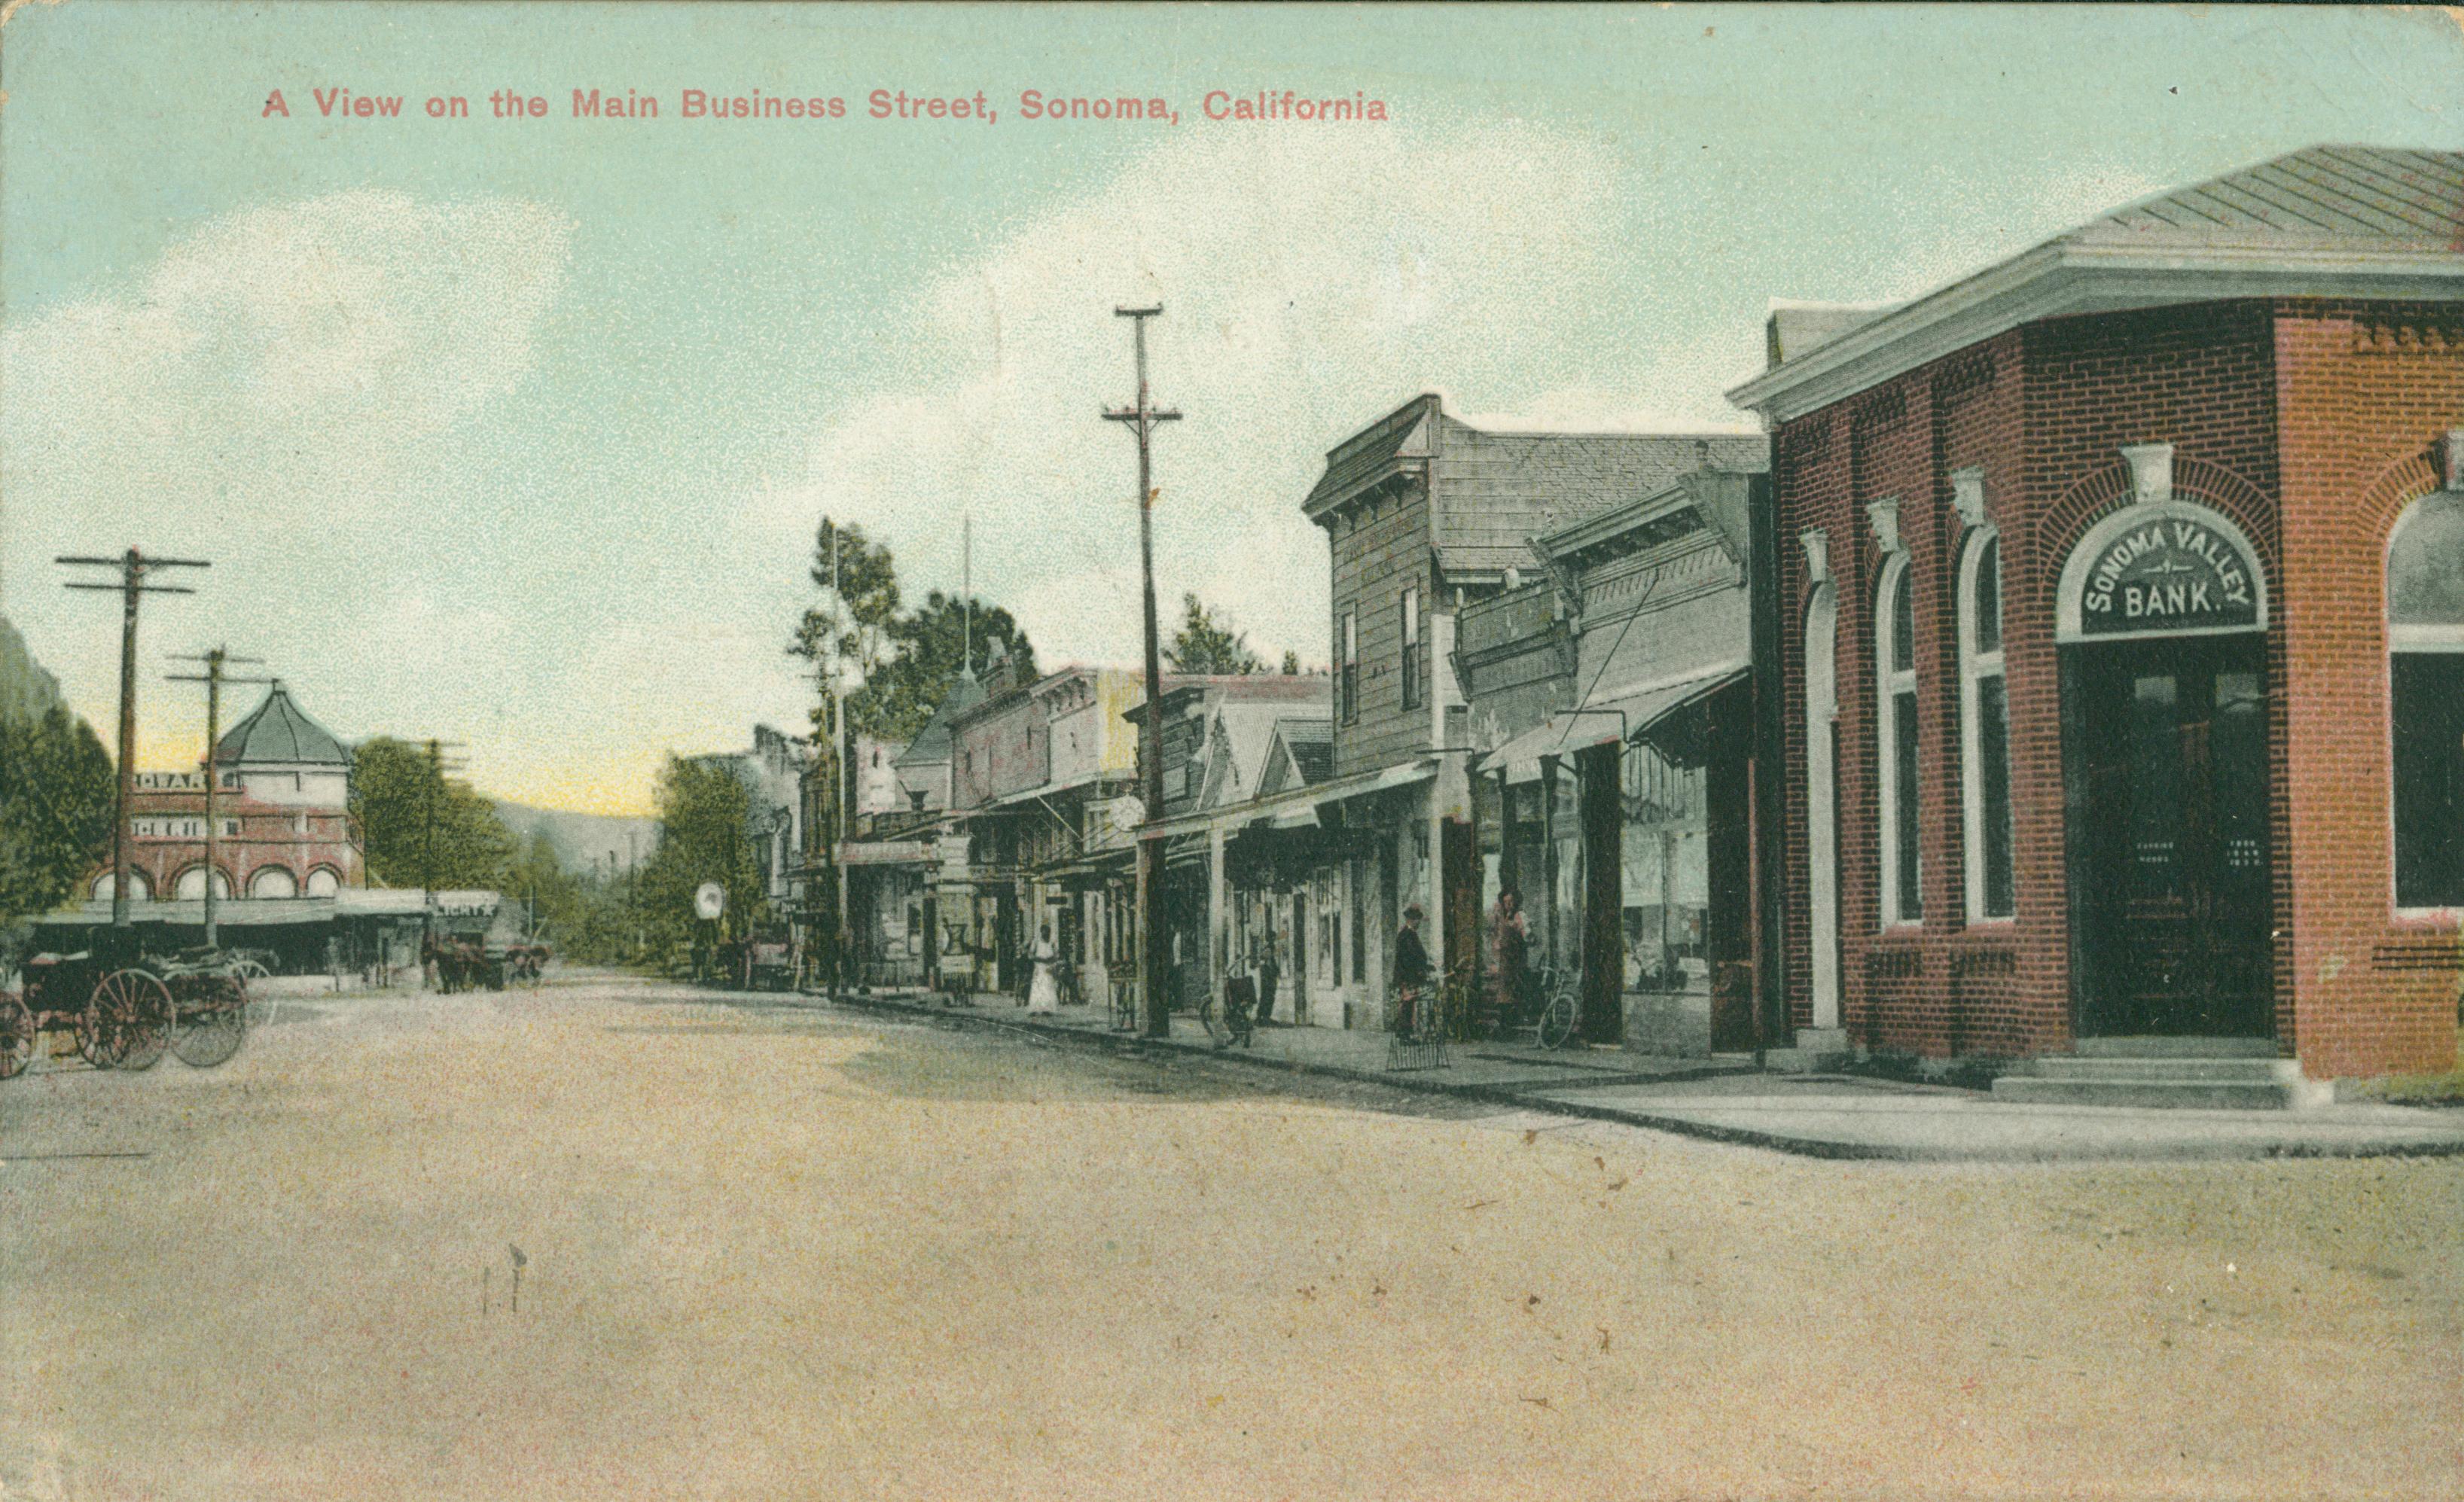 Shows a street in Sonoma, lined by buildings